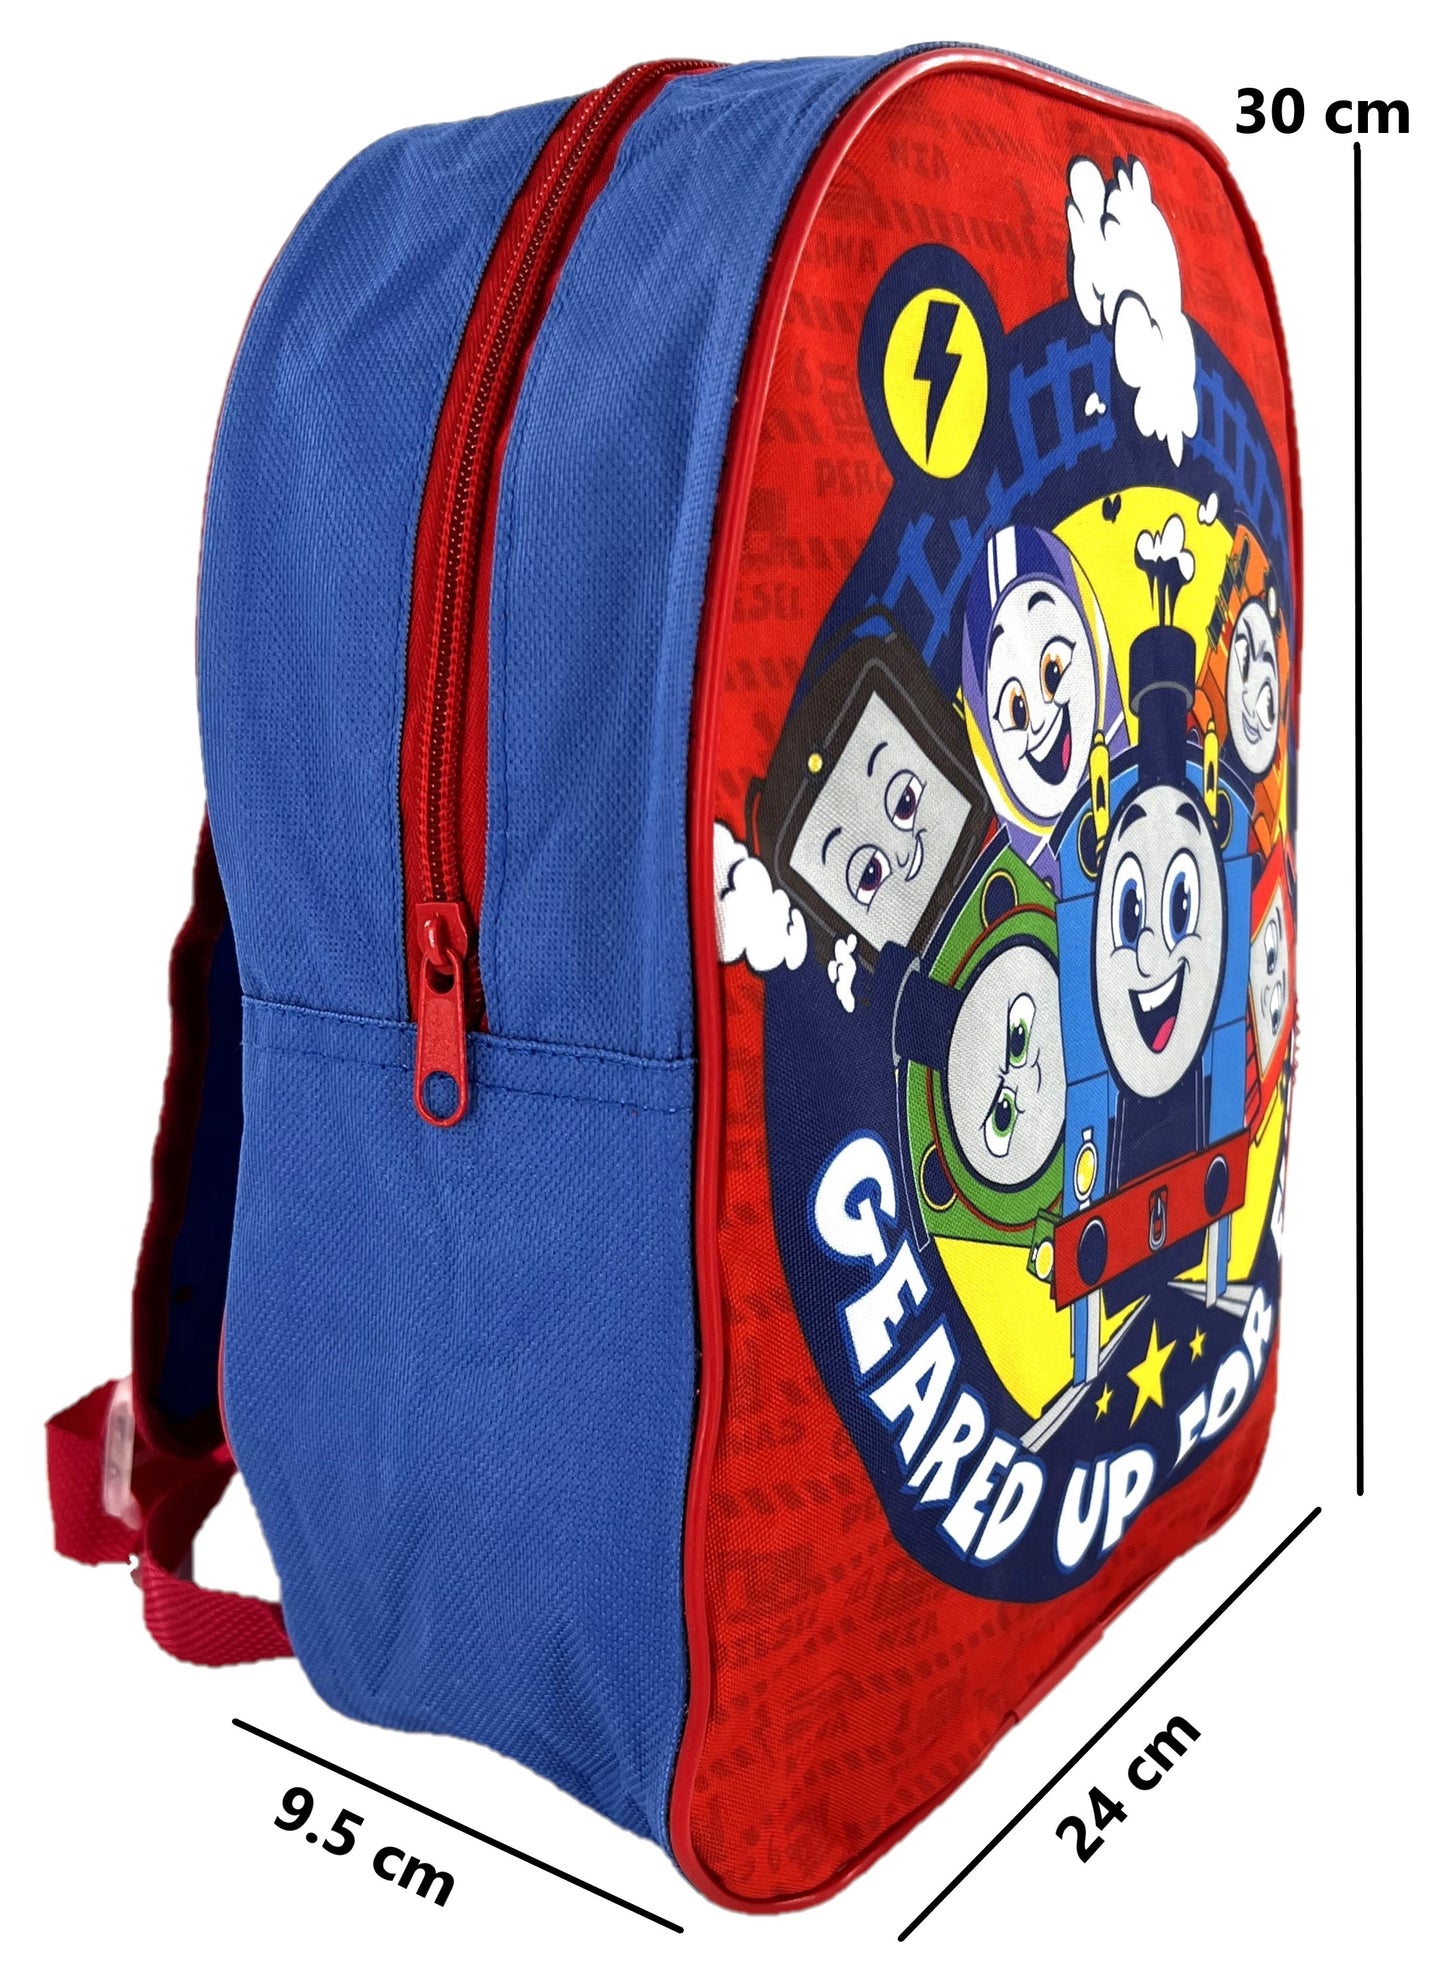 Thomas & Friends Children's Junior Backpack with Net Side Pocket